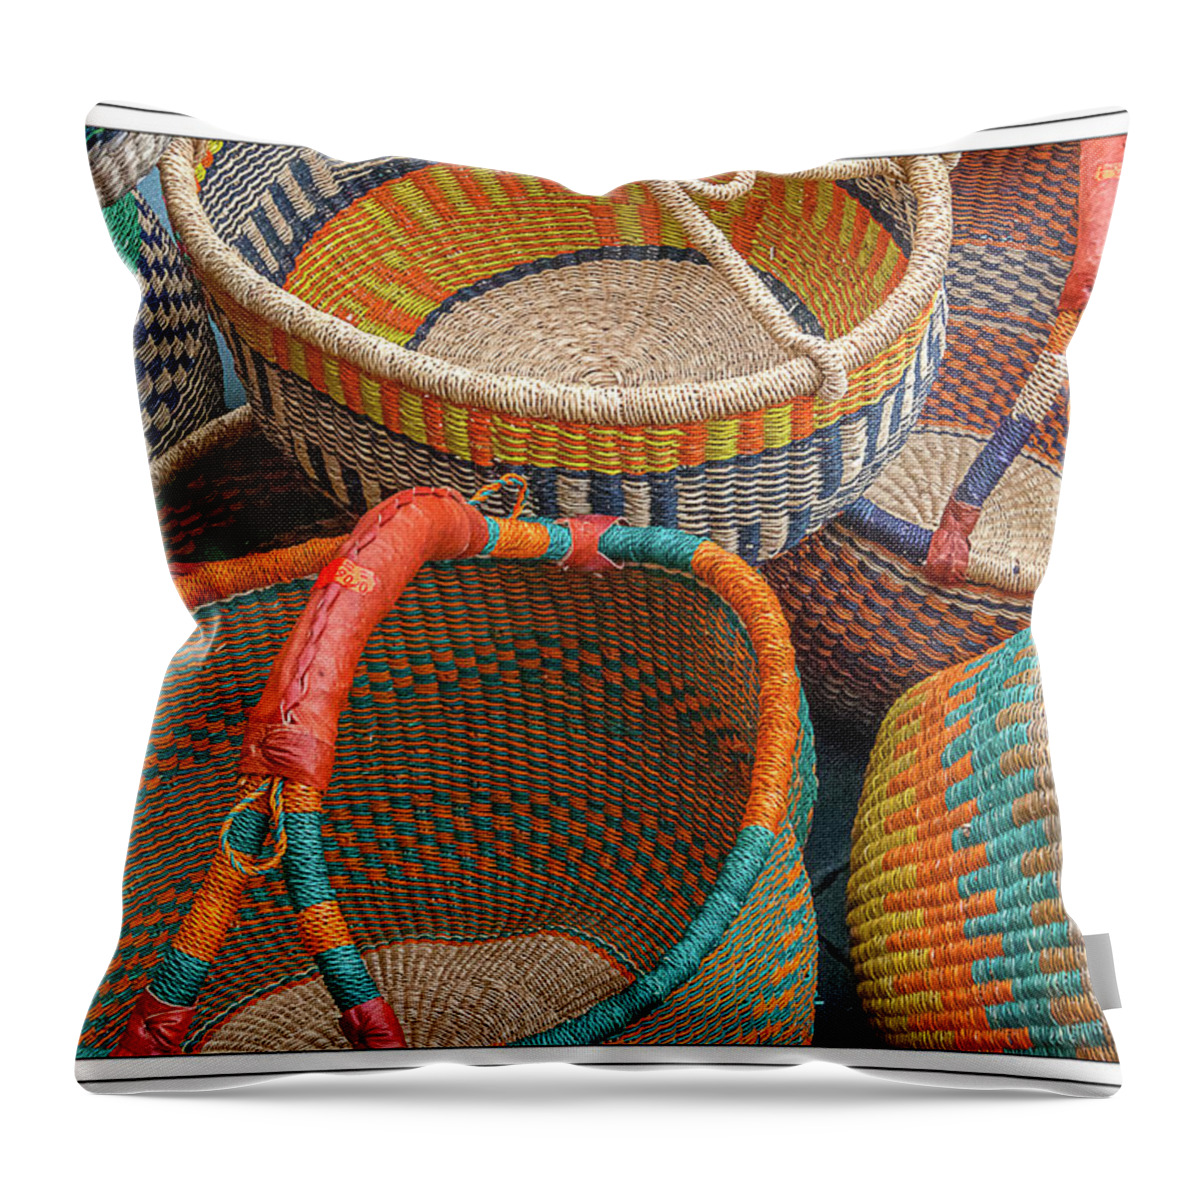 Baskets Throw Pillow featuring the photograph Colorful Baskets from Nurenberg Market by Peggy Dietz